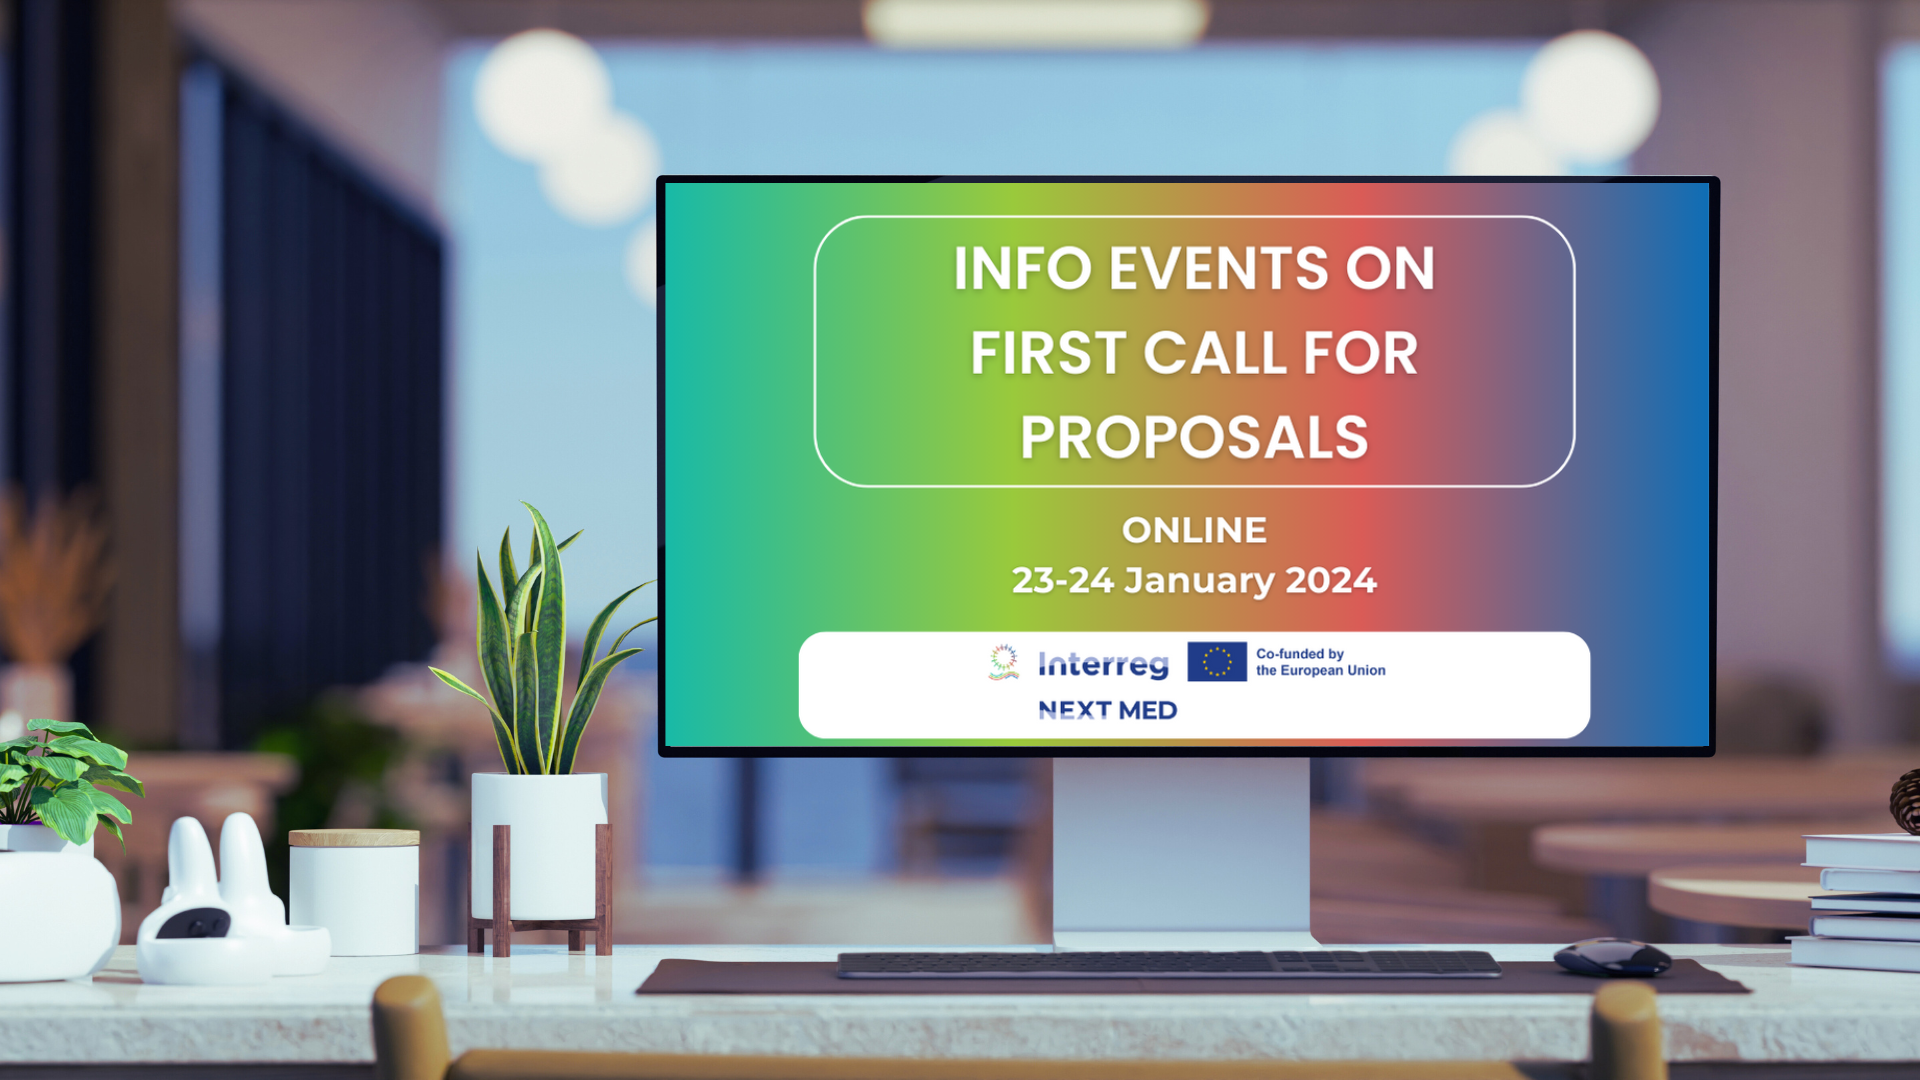 Join Interreg NEXT MED Online Information Events on the First Call for Proposals